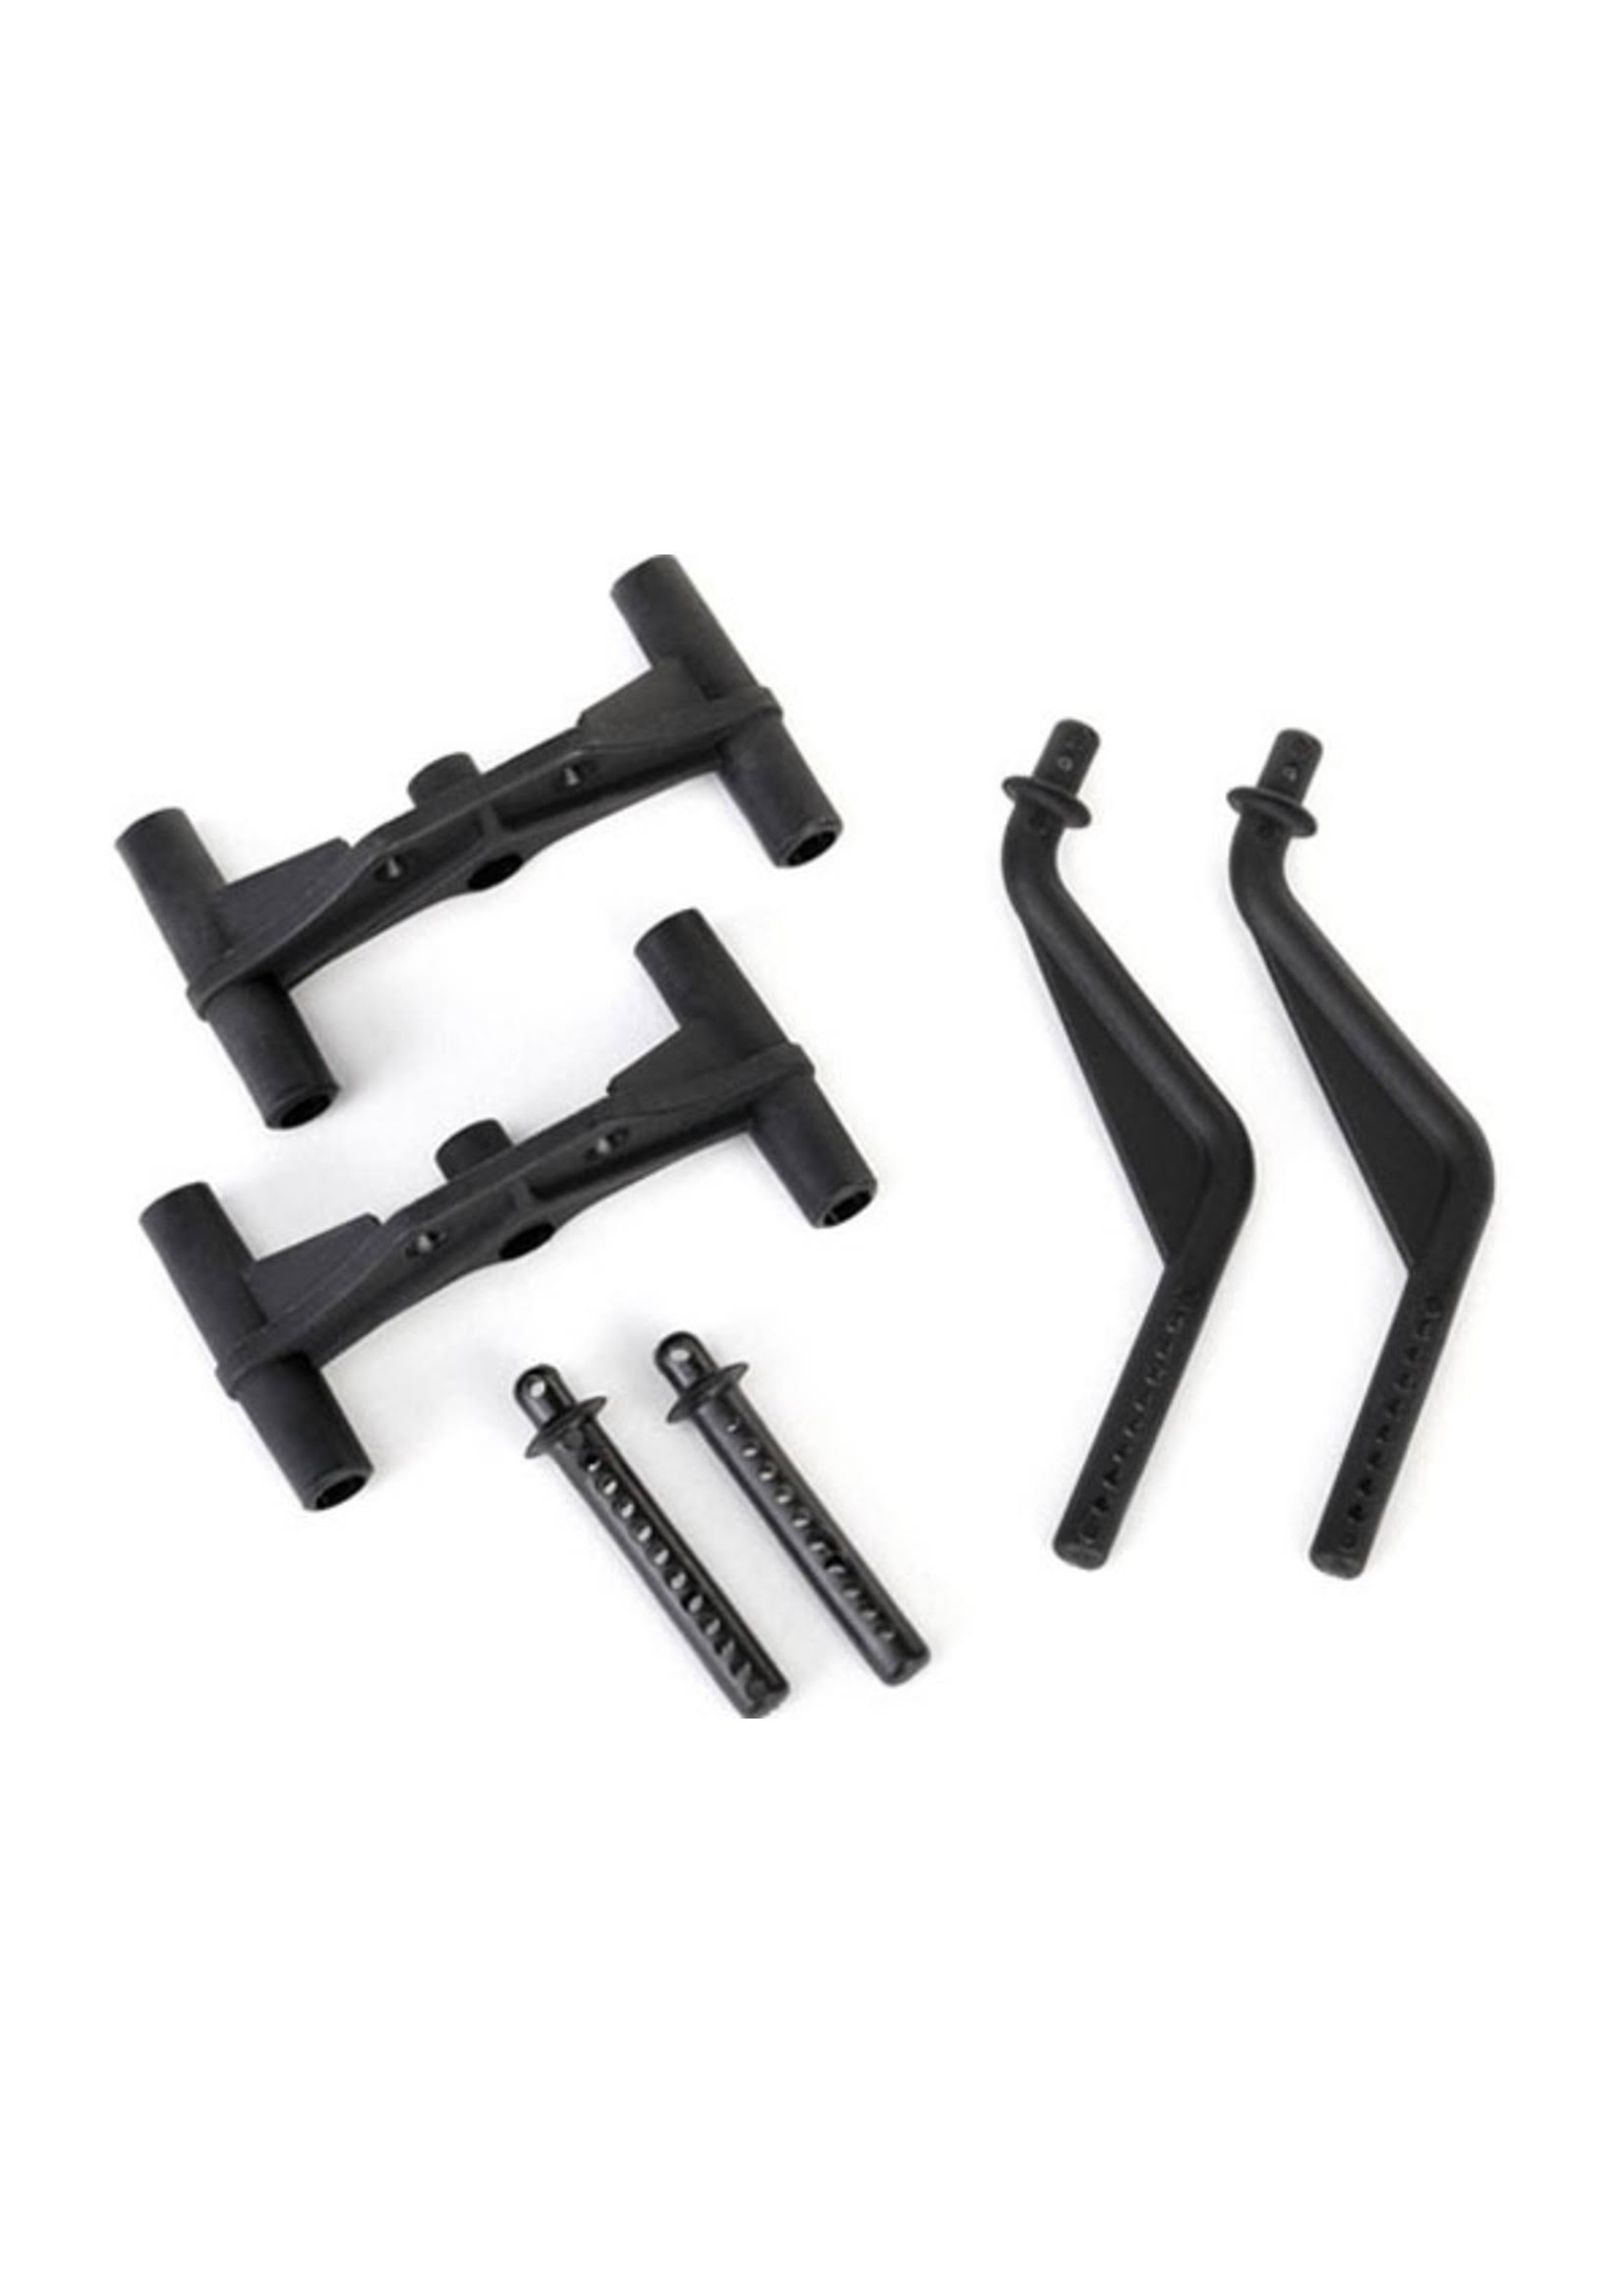 Traxxas Tra7516 LaTrax Rally 4wd Front Rear Body Mounts and Posts